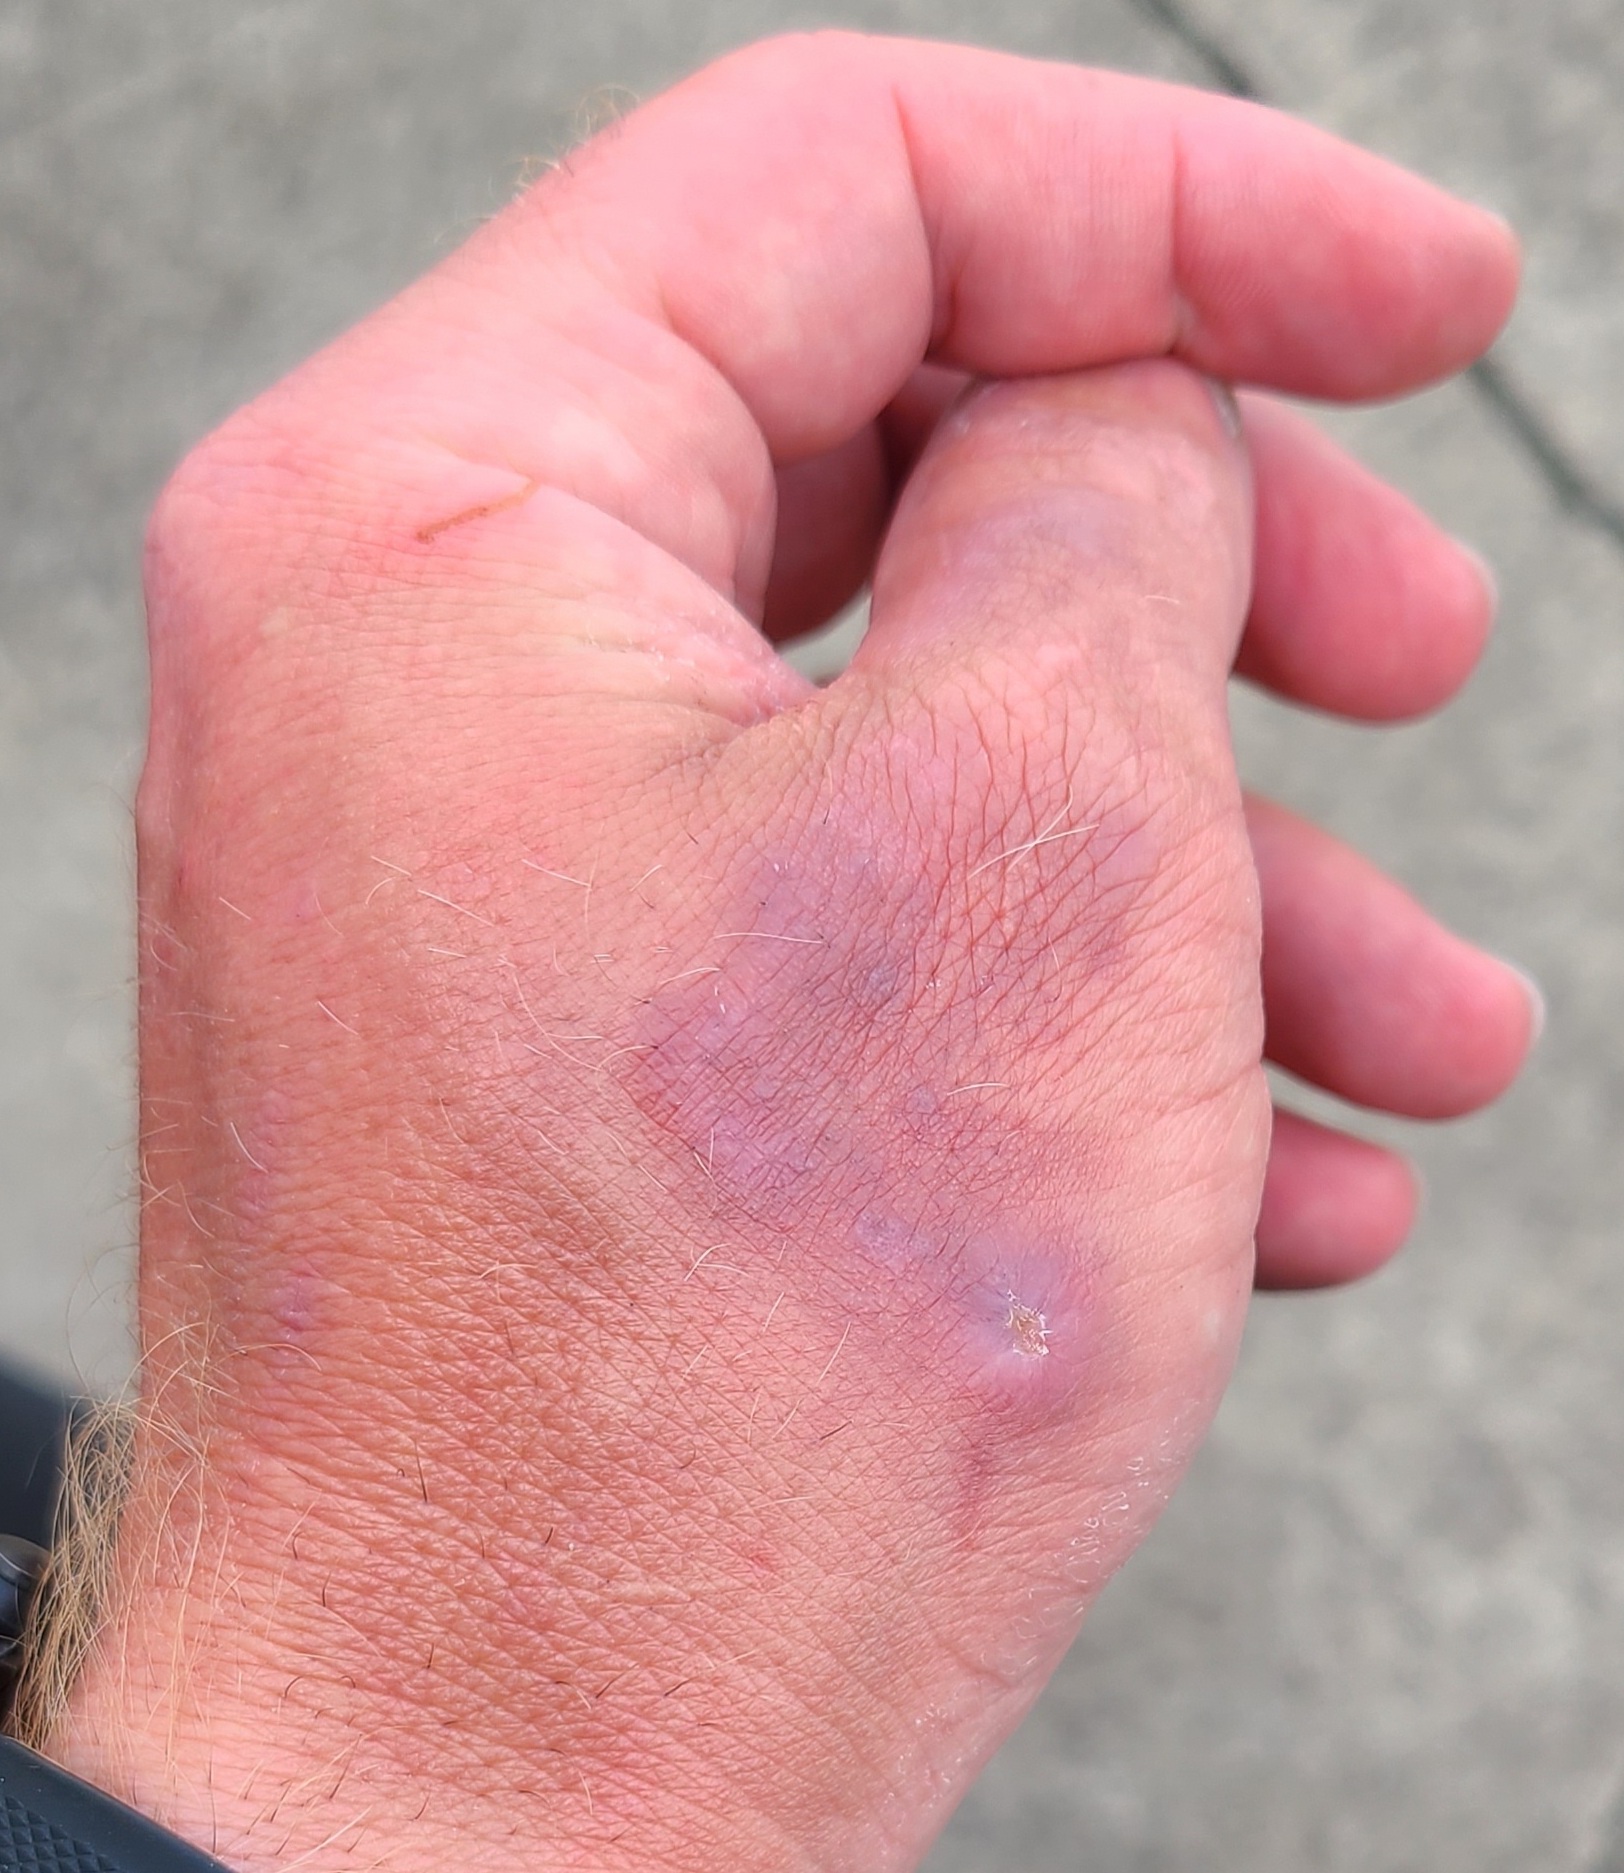 Healed ringworm on a coyote hunter's hand.